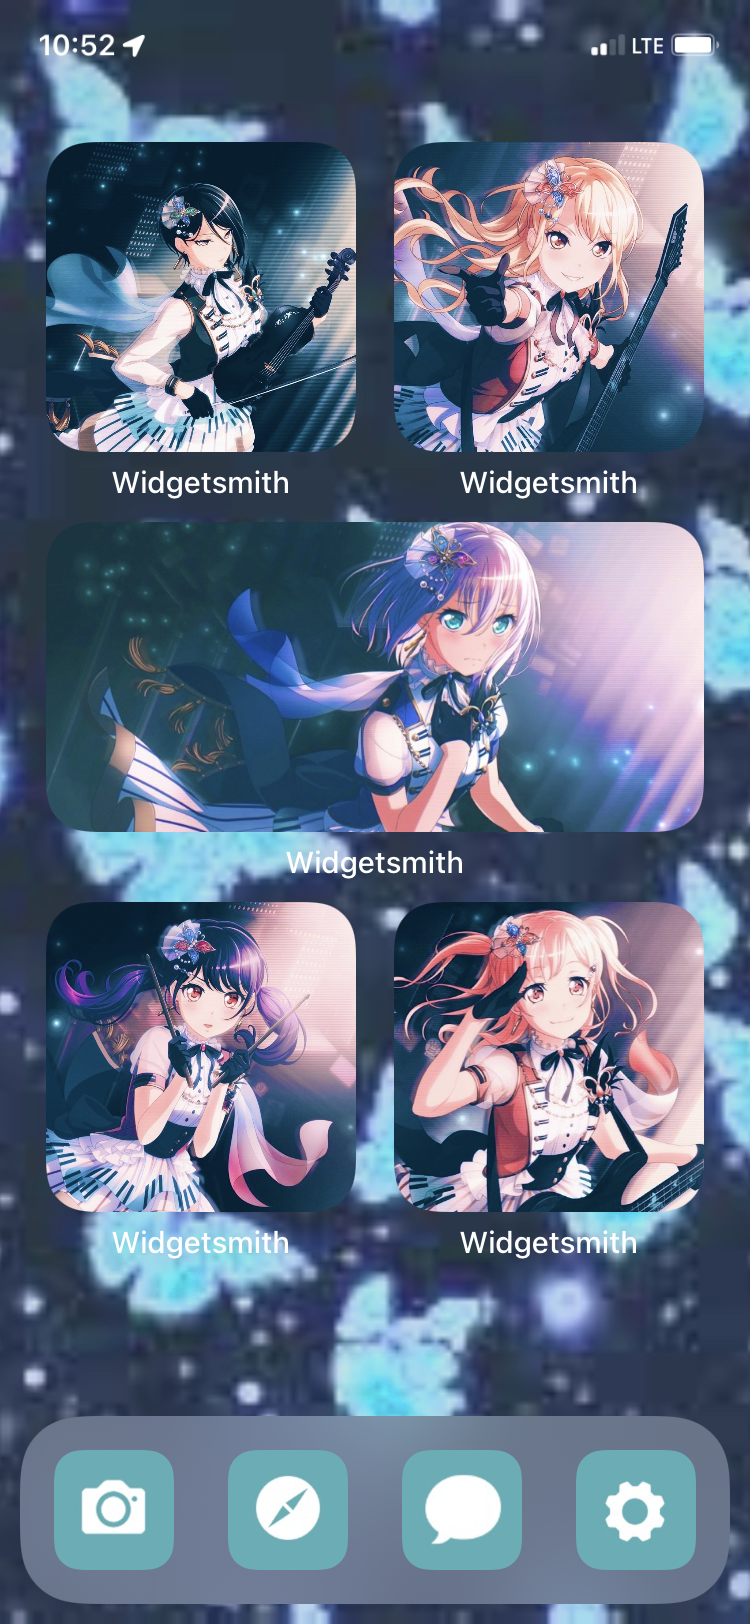 lazy morfonica home screen! afterglow is still my fave band tho 